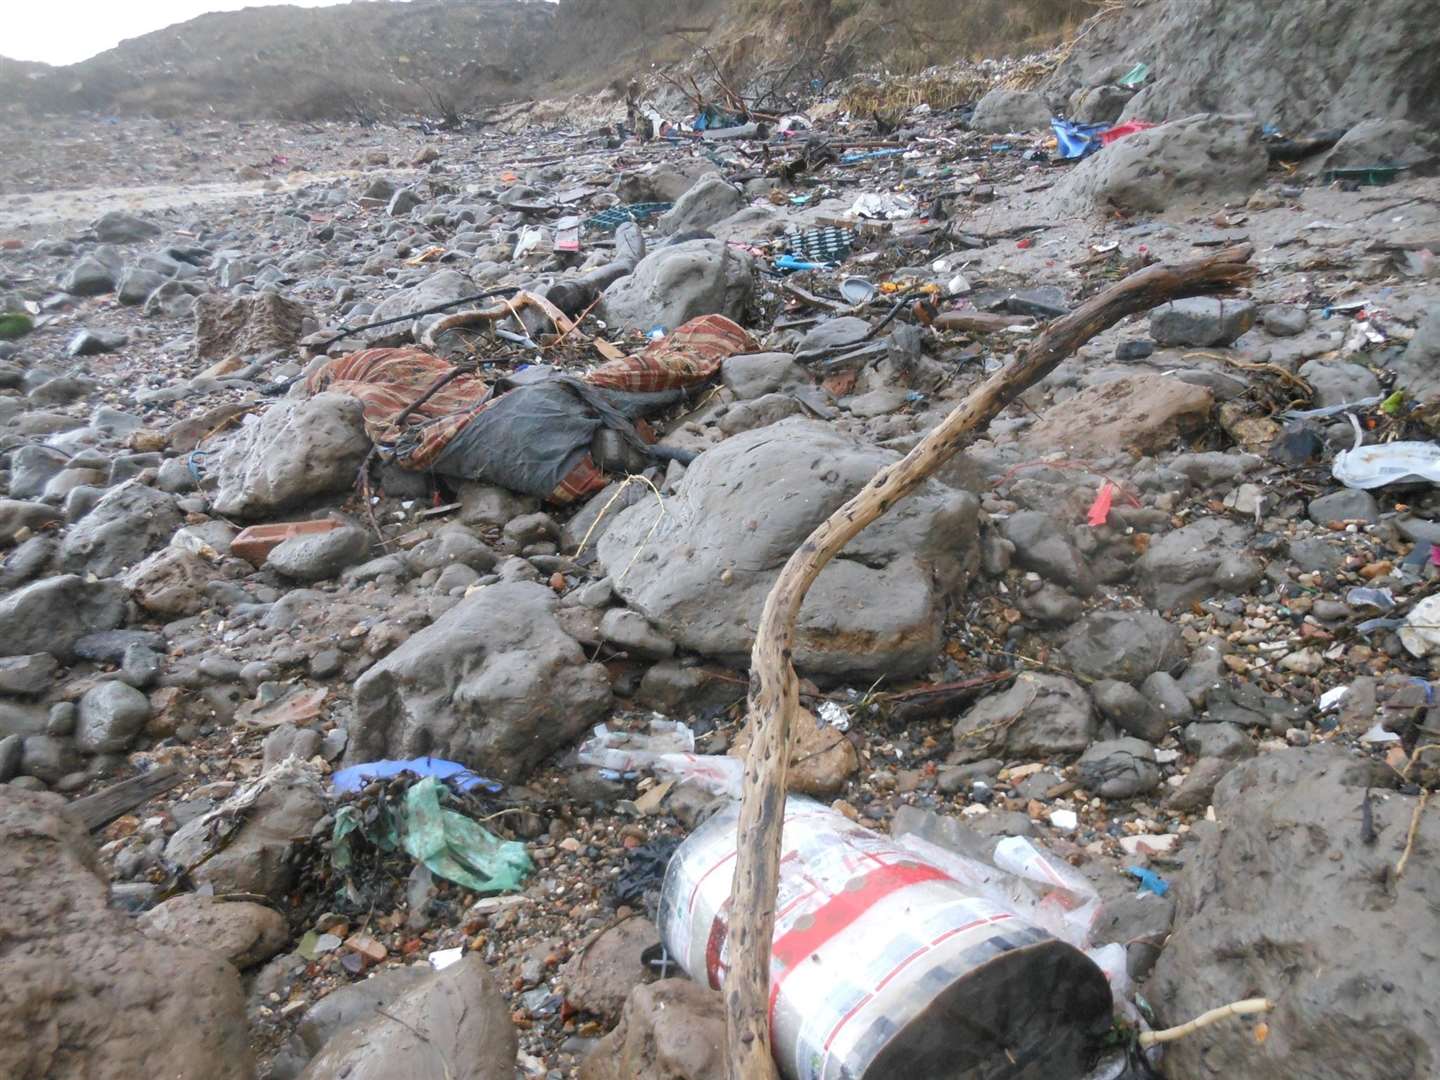 The Tesco tomato wrappers and other rubbish washed up in Eastchurch. Picture: Daniel Hogburn